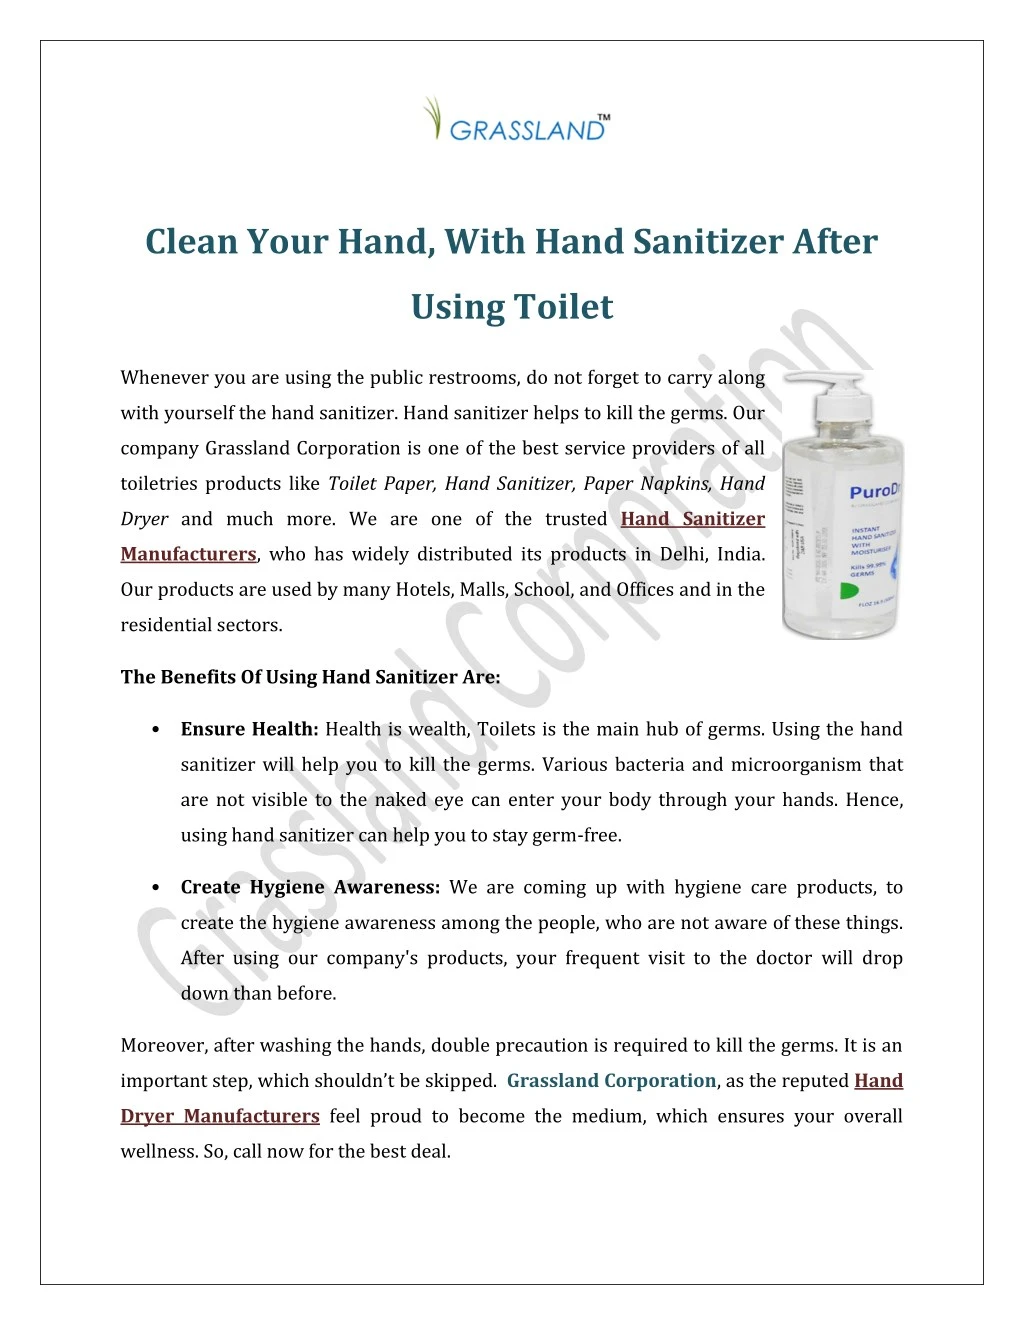 clean your hand with hand sanitizer after